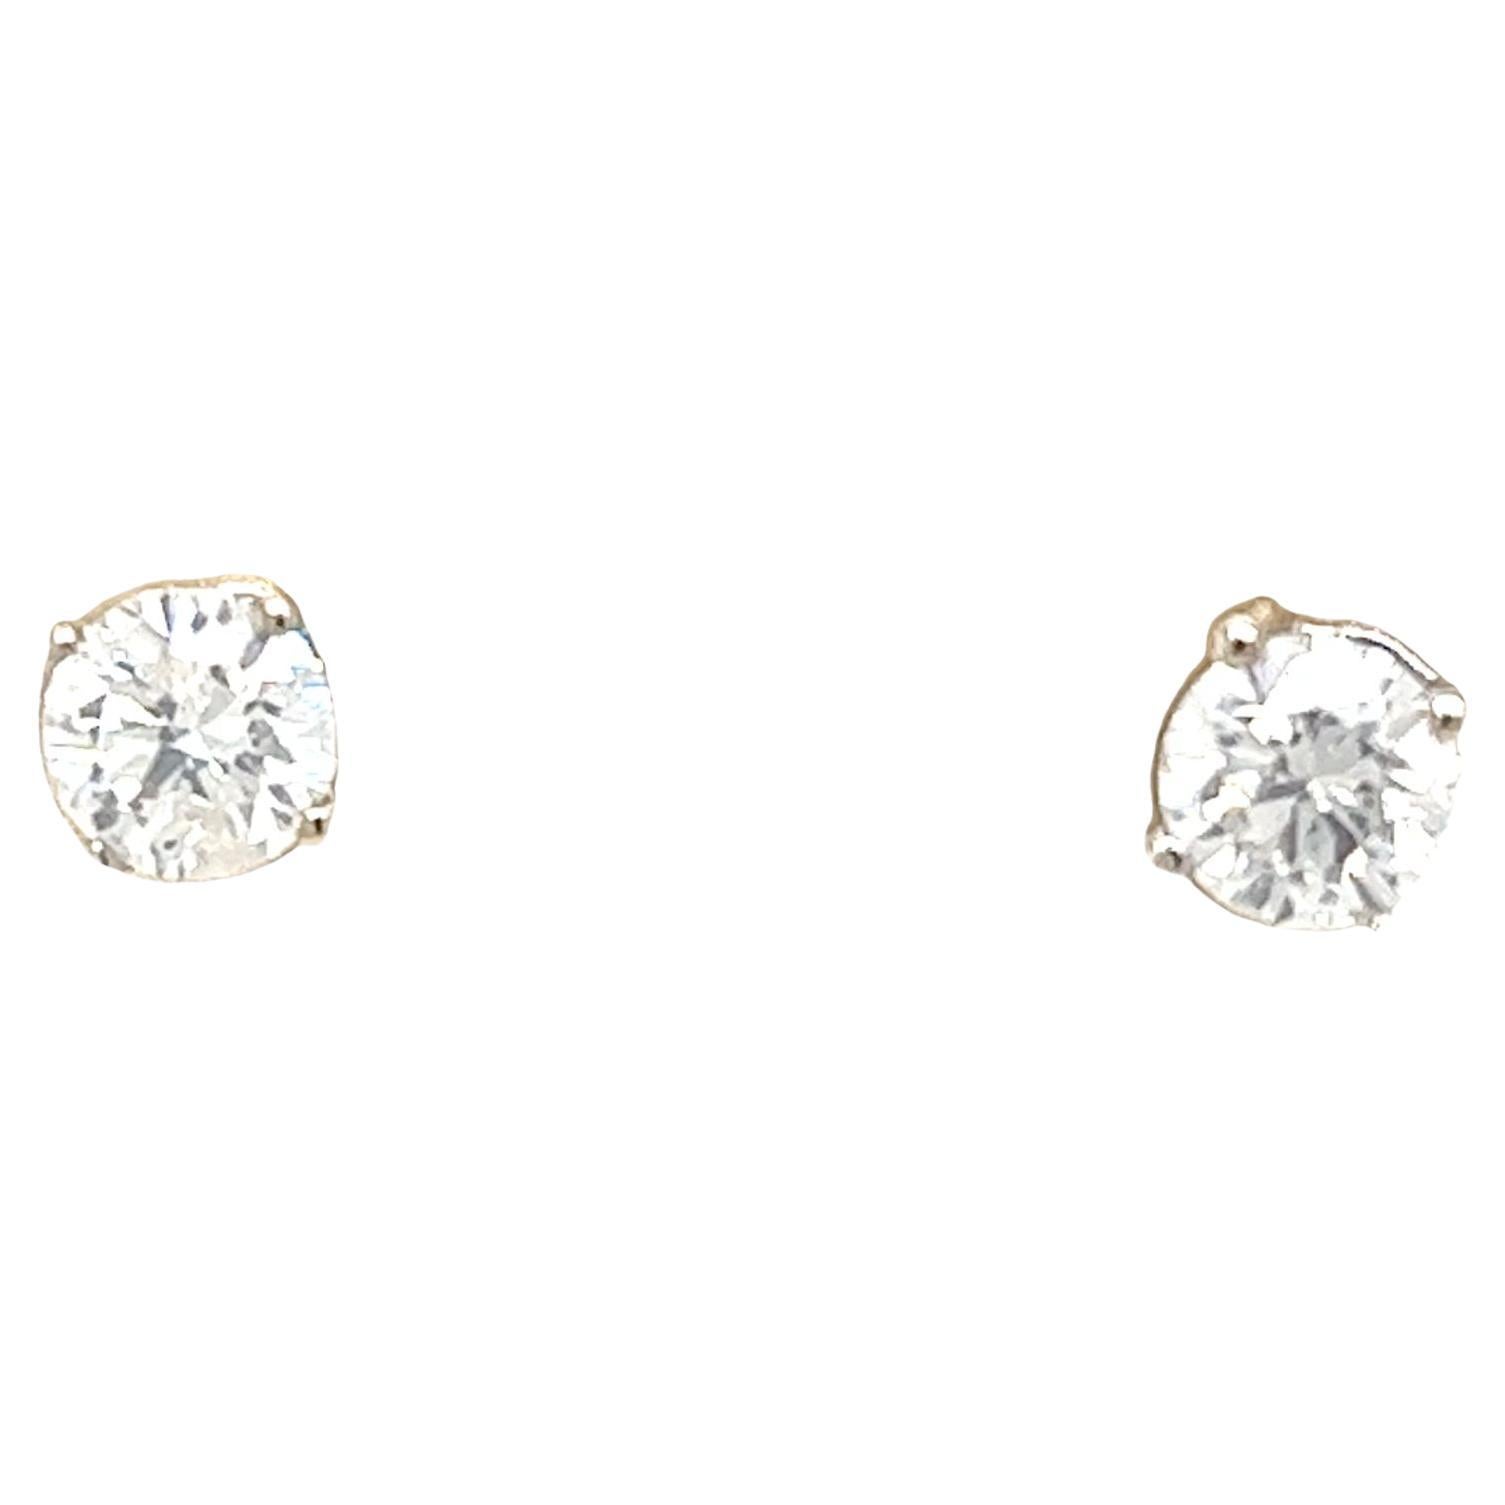 9ct Yellow & White Gold Diamond Stud Earrings, 0.65ct Total Diamond Weight For Sale